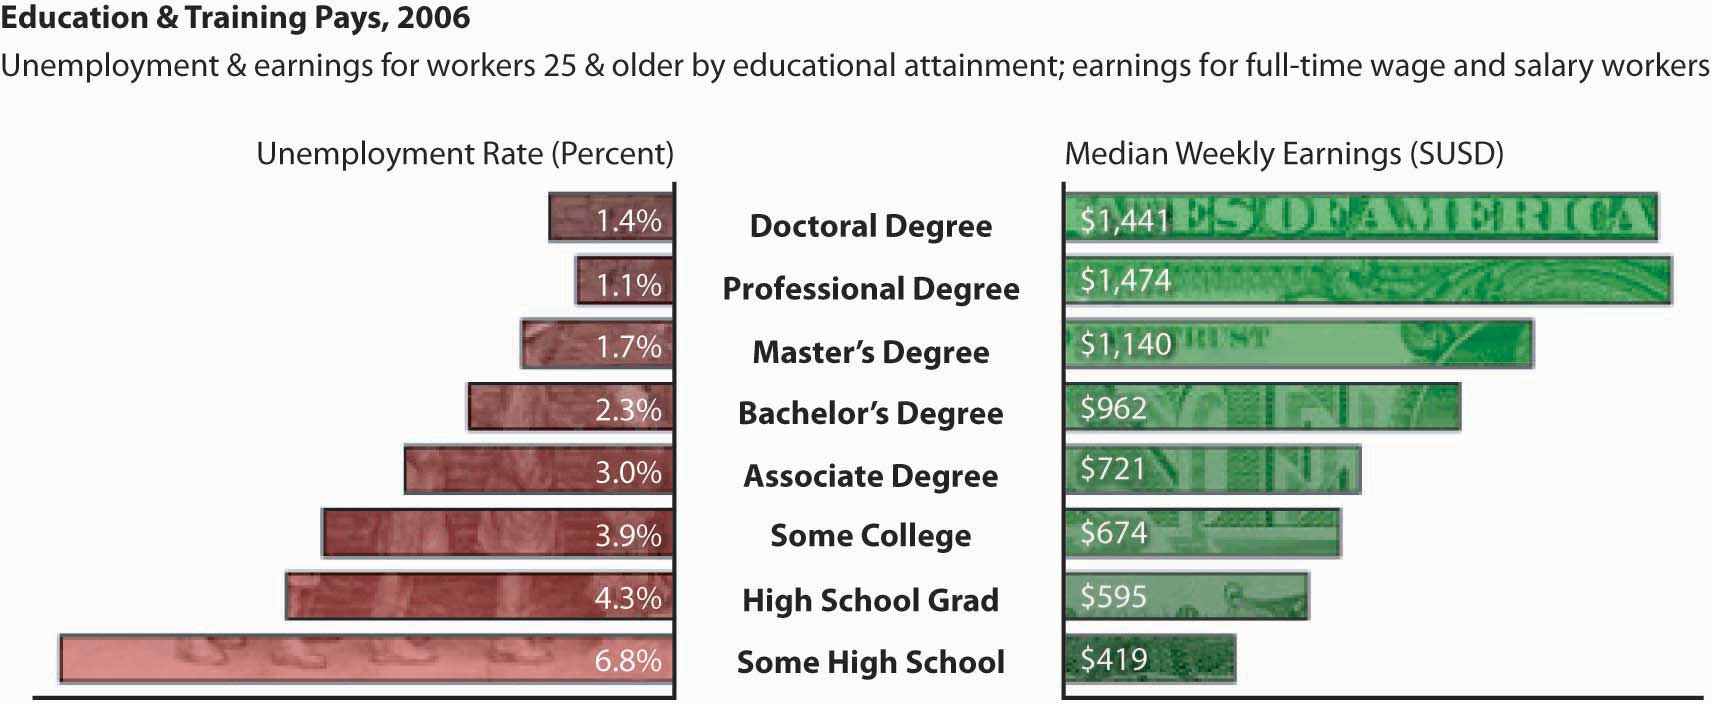 Education and training have financial payoffs as illustrated by these unemployment and earnings for workers 25 and older